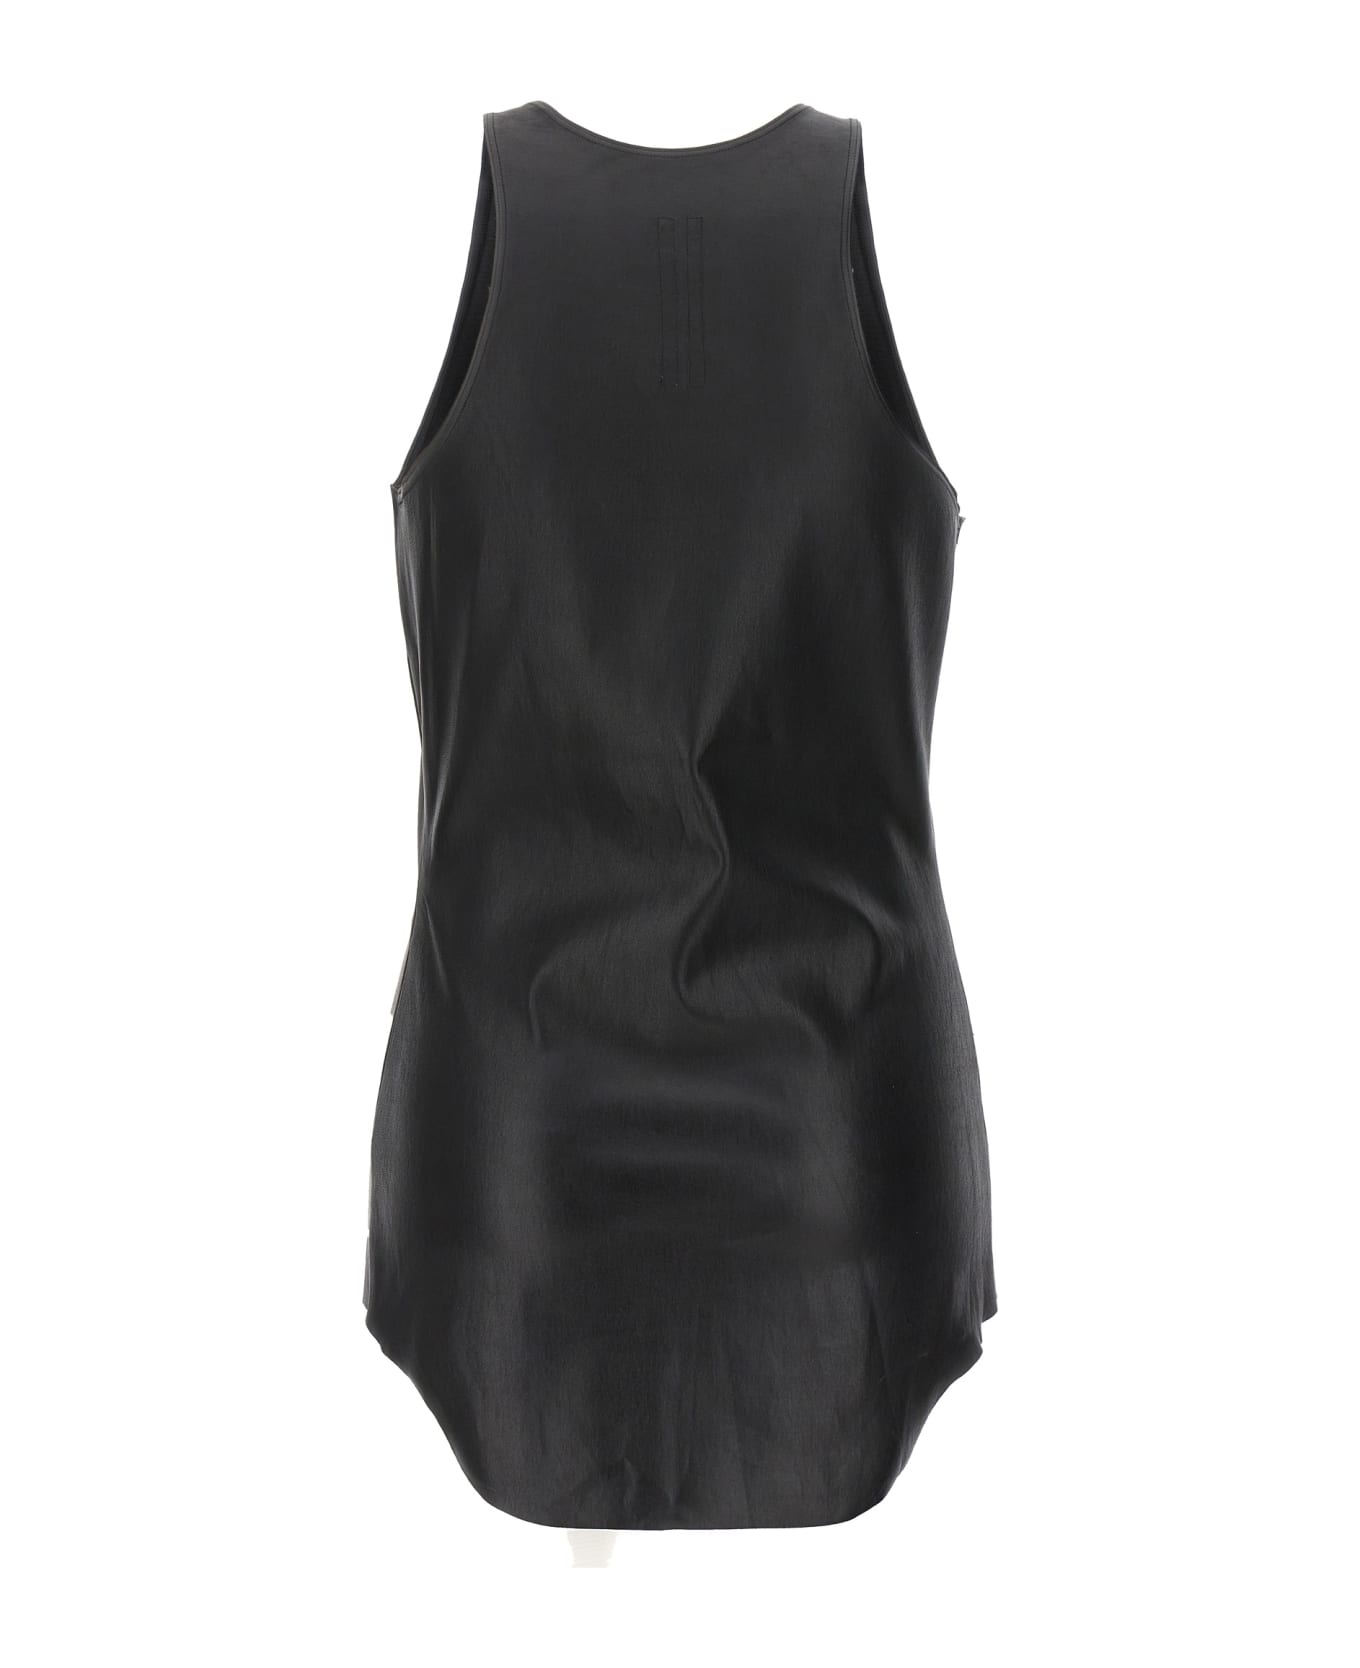 Rick Owens Stretch Leather Top - Black